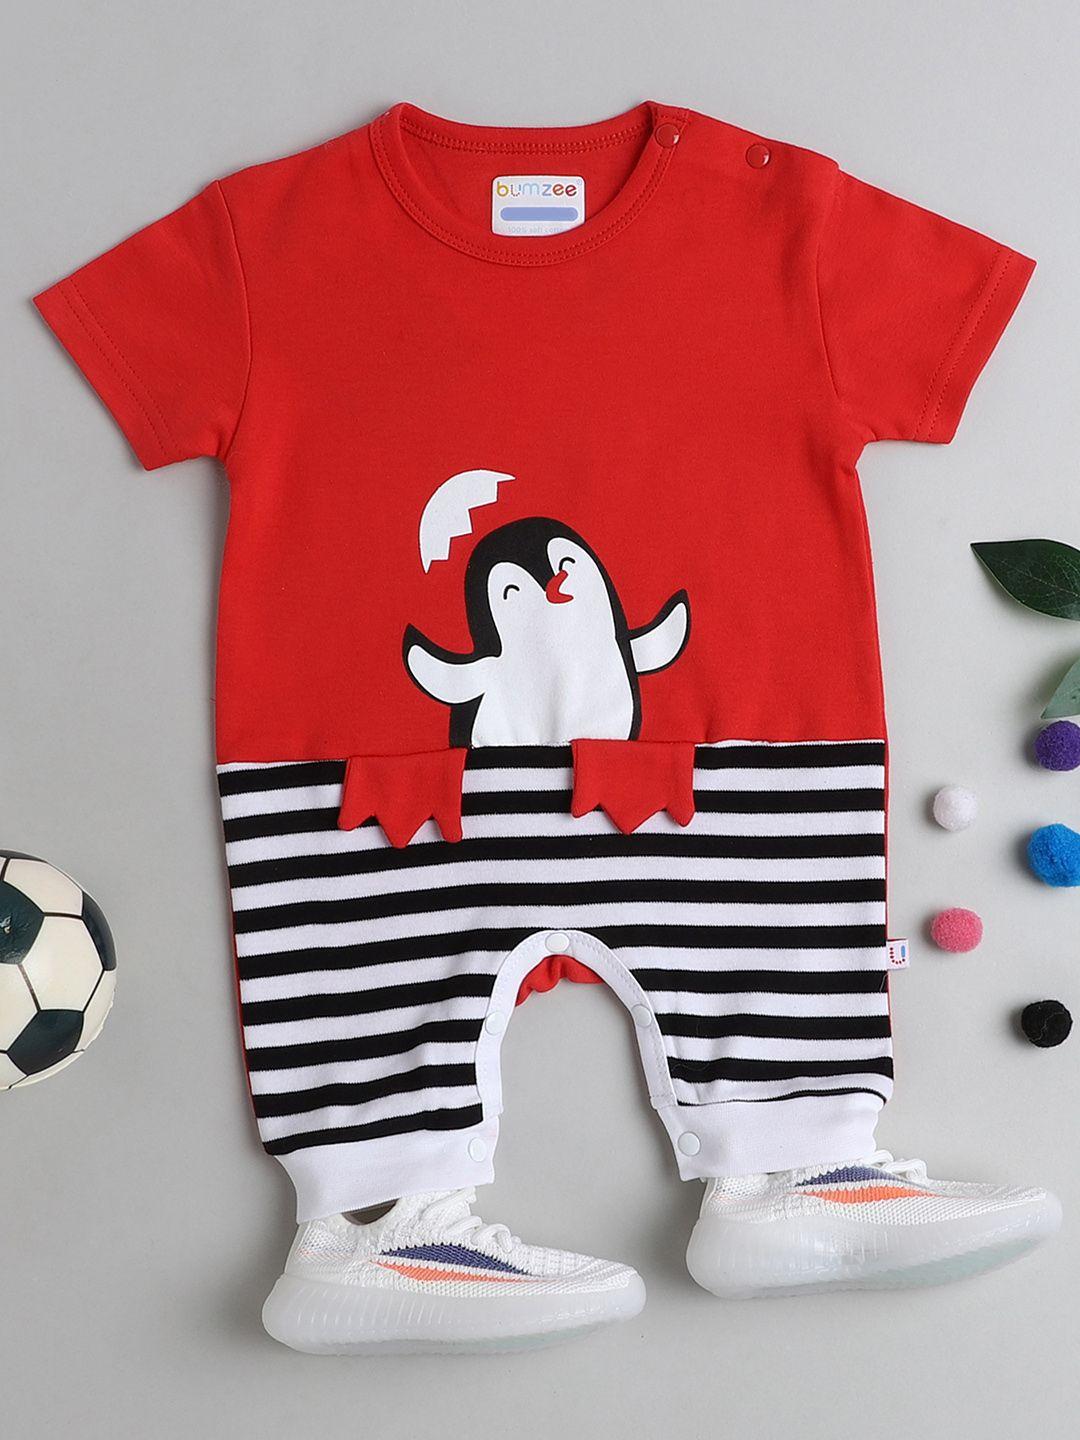 bumzee-infant-boys-red-&-black-printed-pure-cotton-rompers